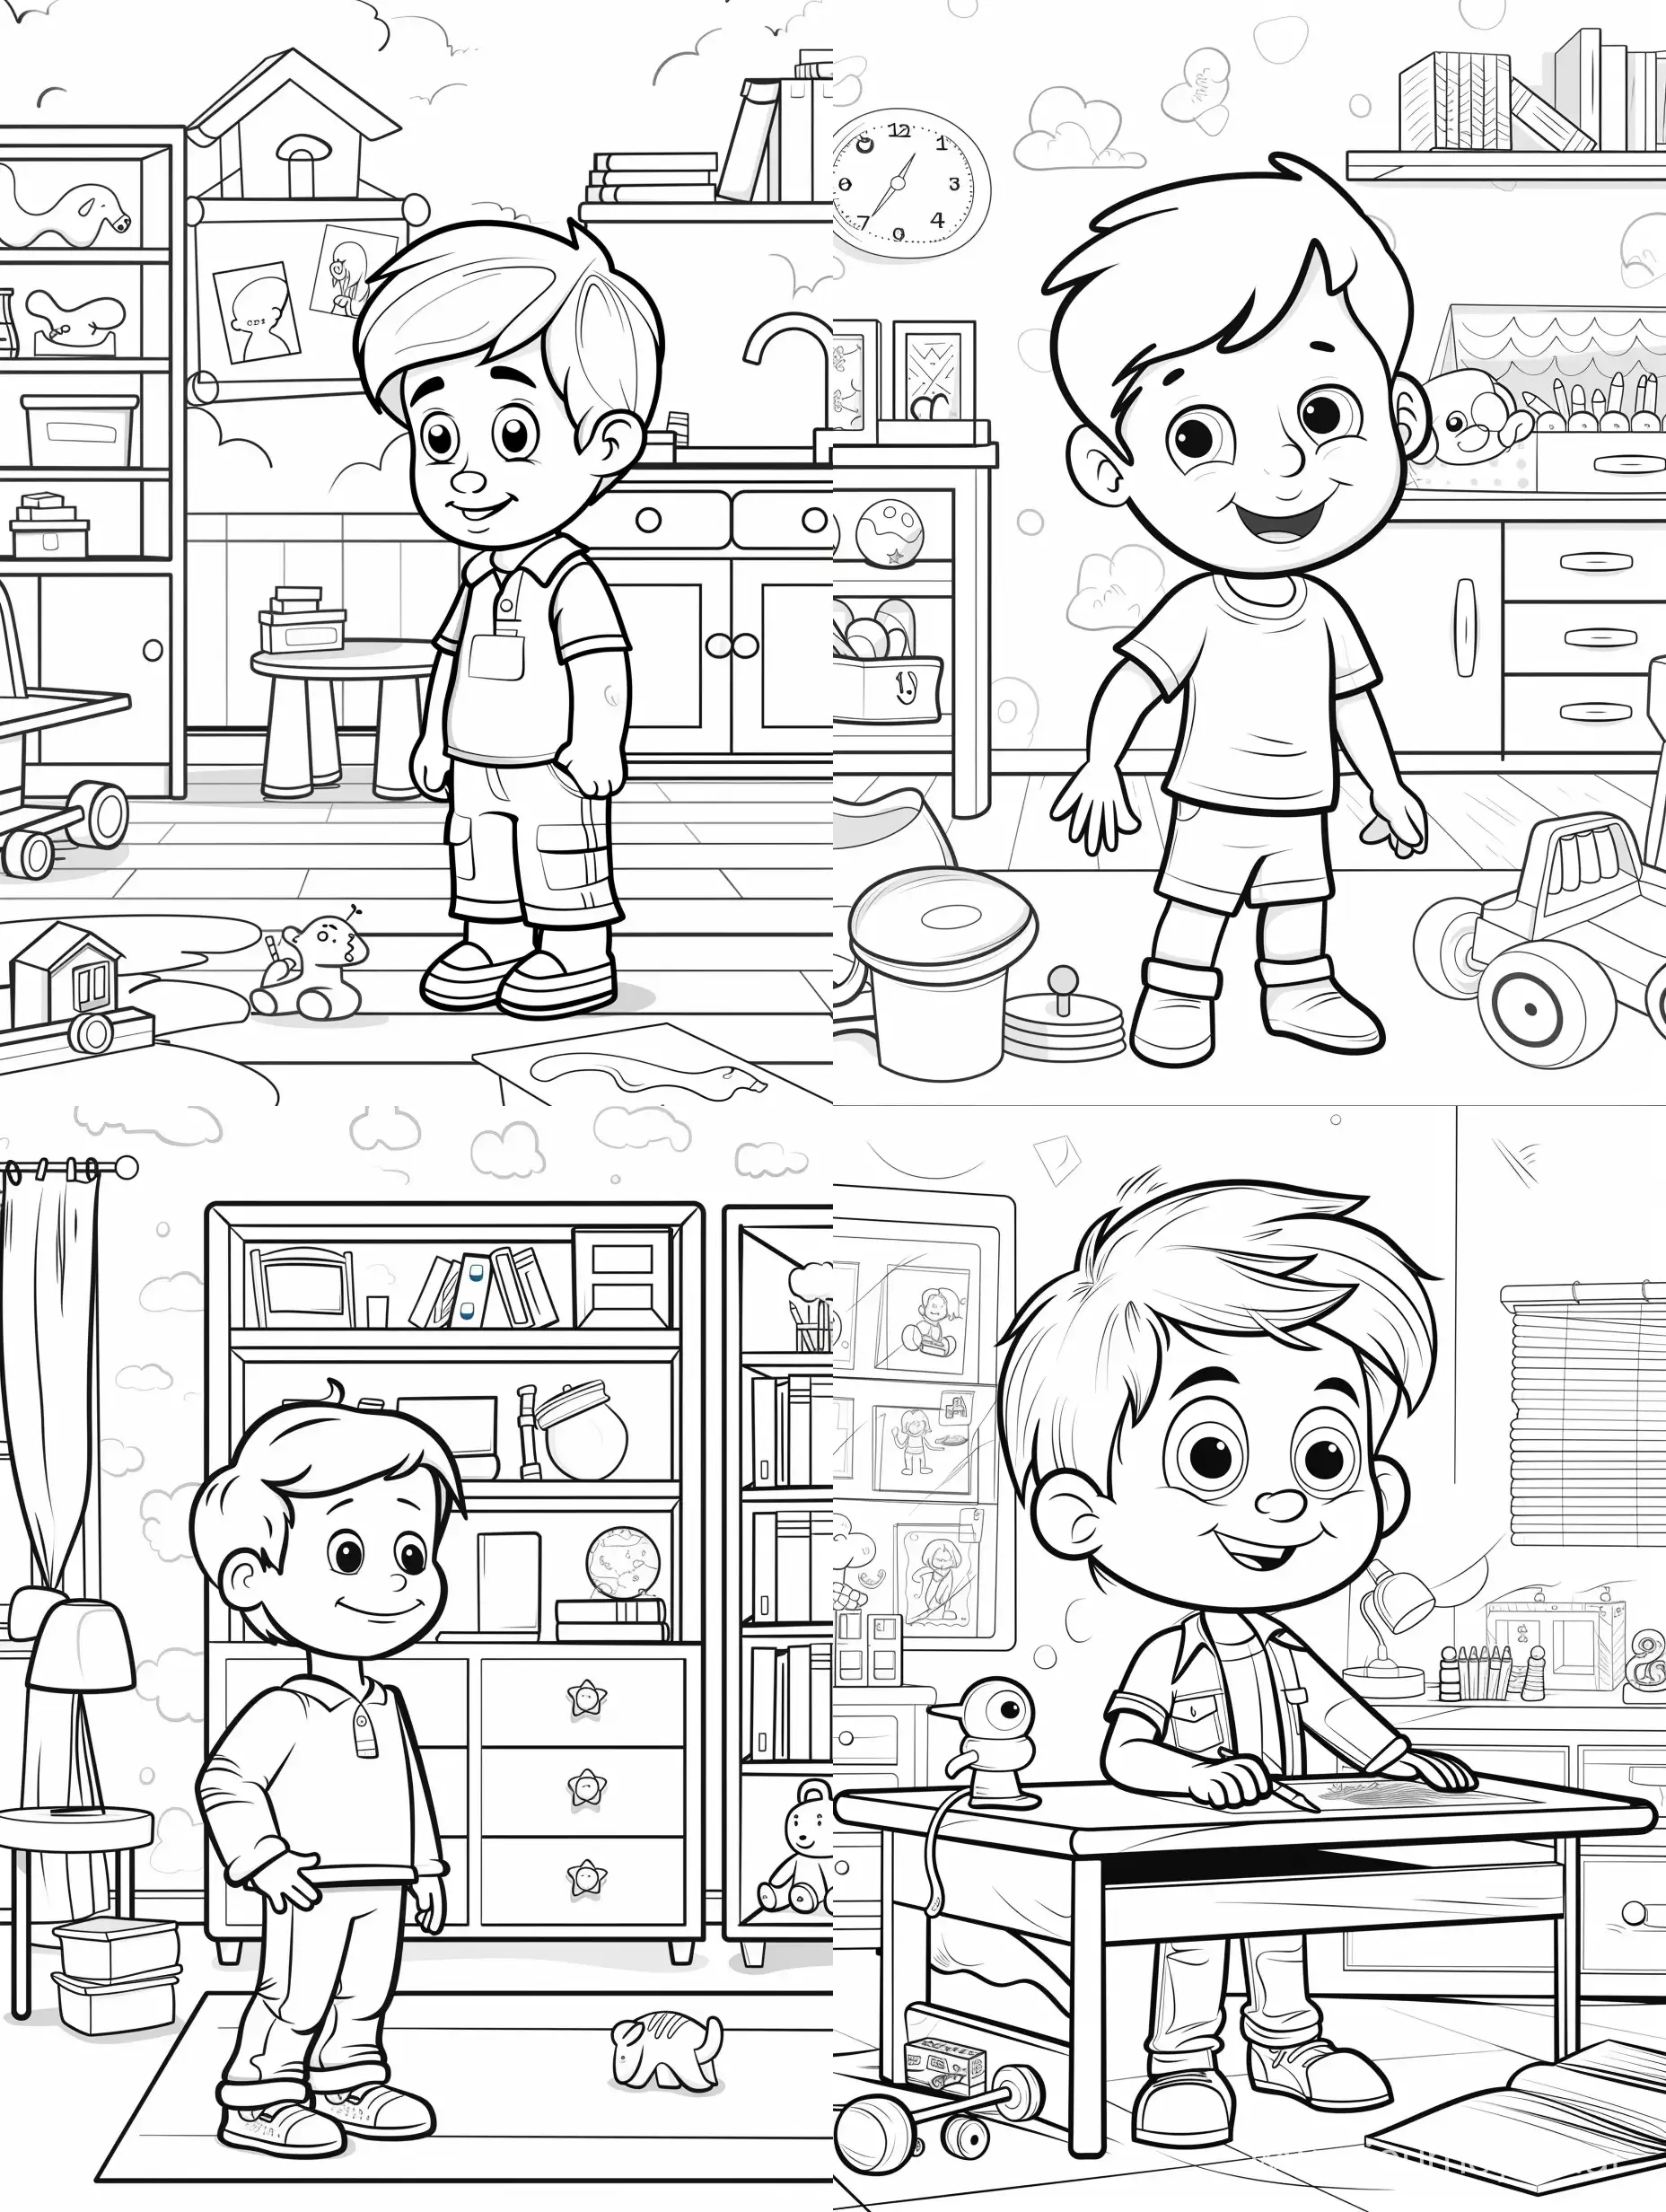 Cheerful-Child-in-Vibrant-Playroom-Coloring-Page-for-Kids